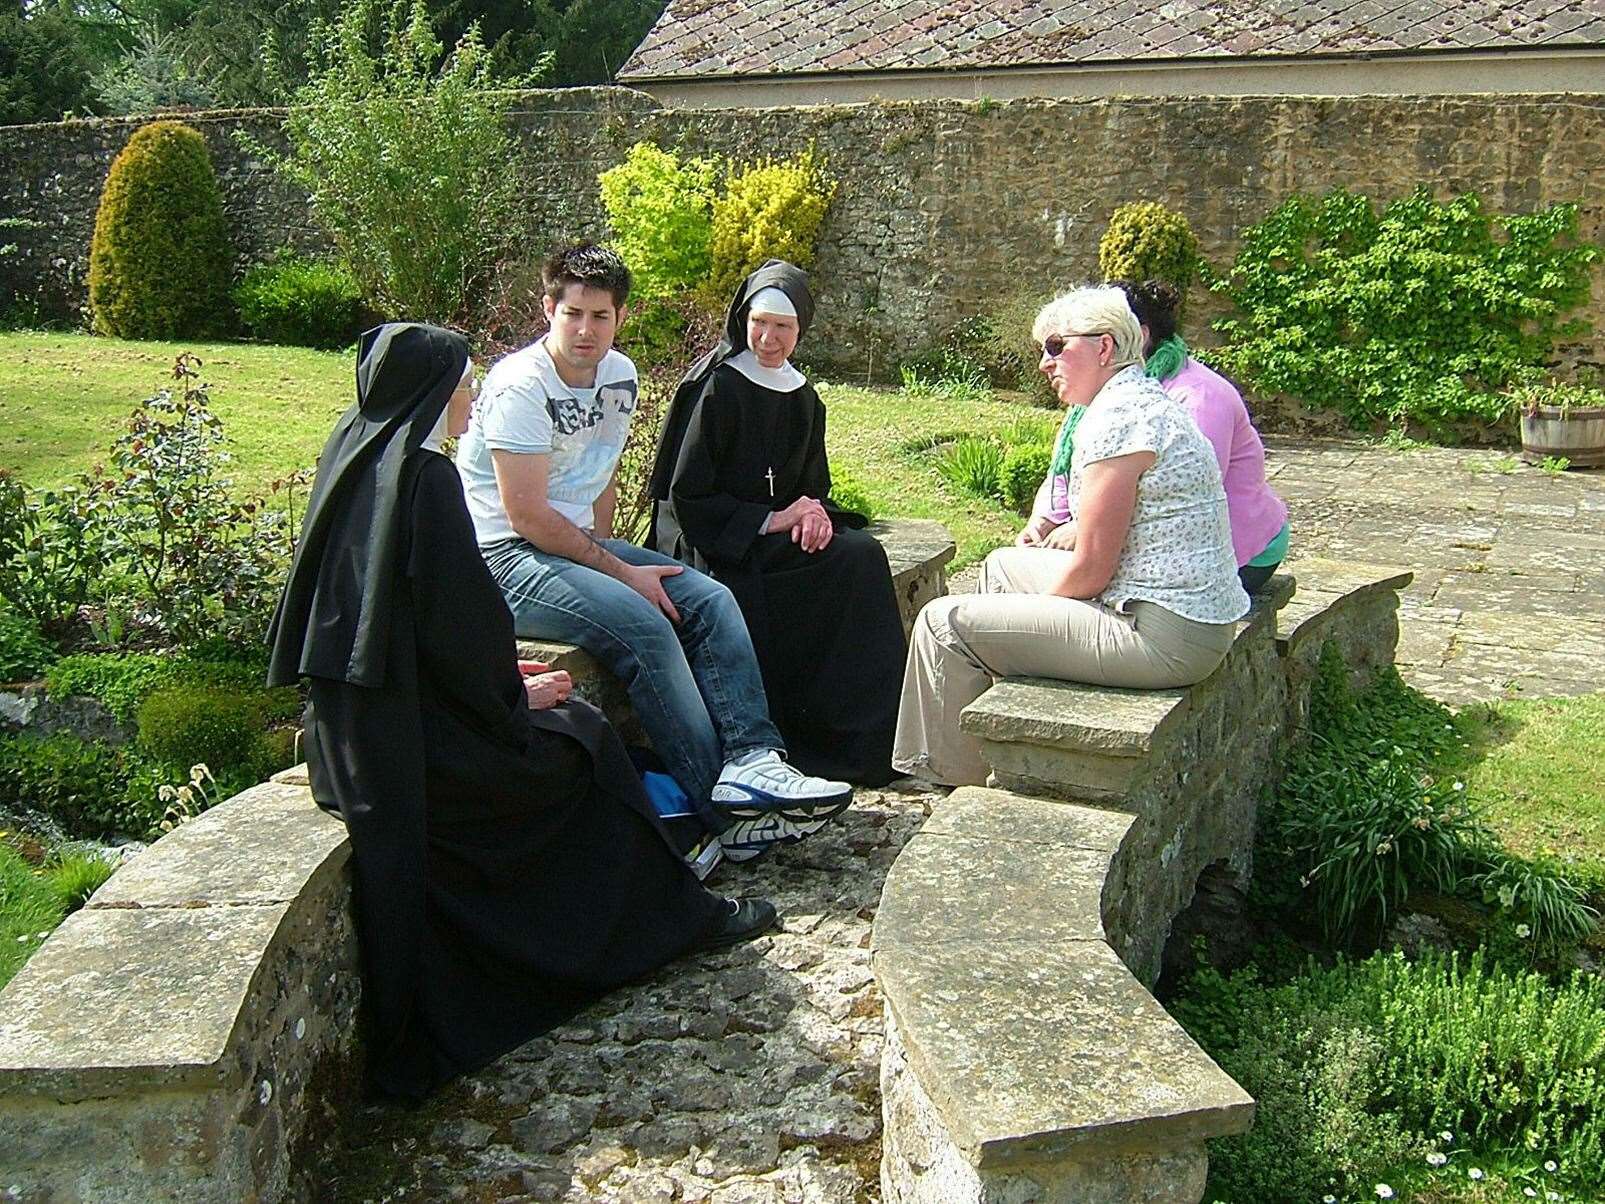 Nuns and guests in St Mary's Abbey in West Malling (7267936)